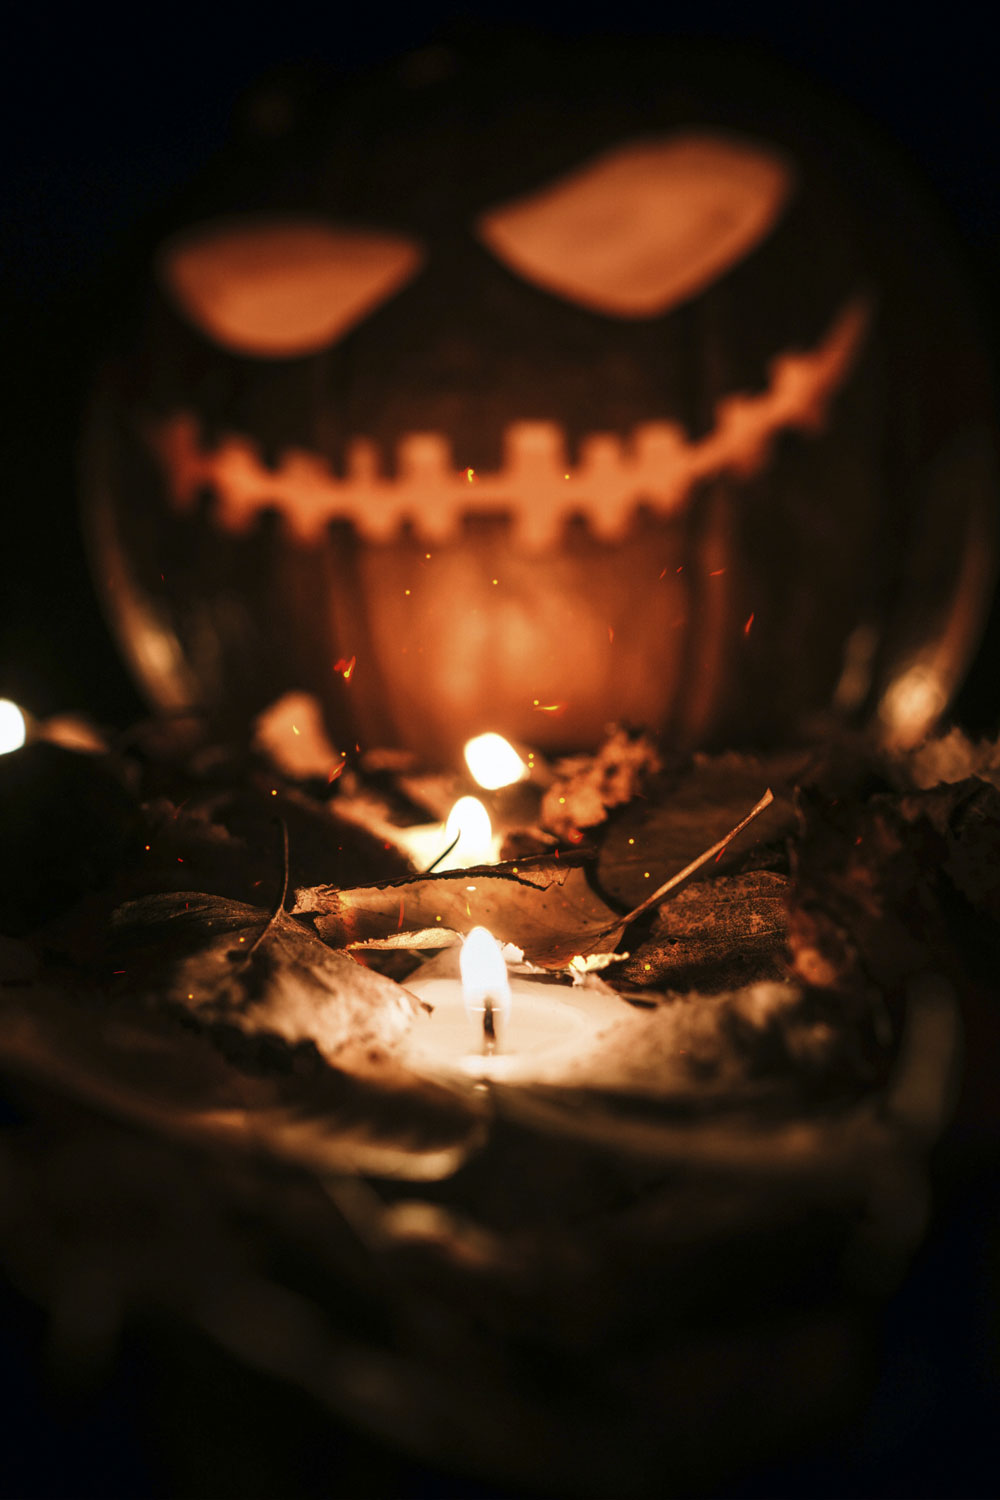 Out of focus pumpkin with a candle in front.